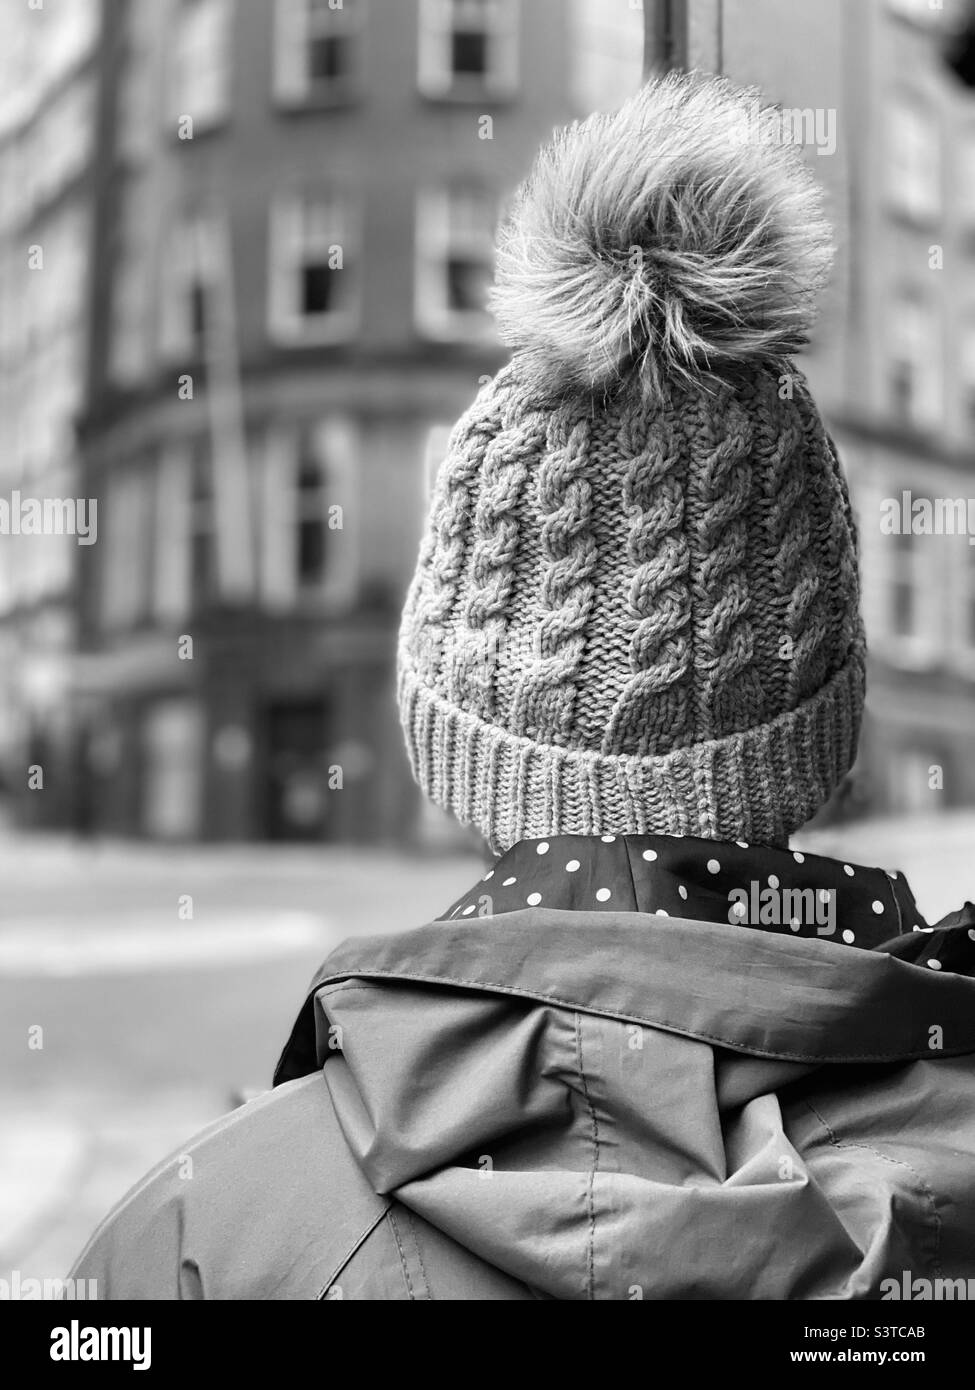 Rear view of woman wearing a knit hat Stock Photo